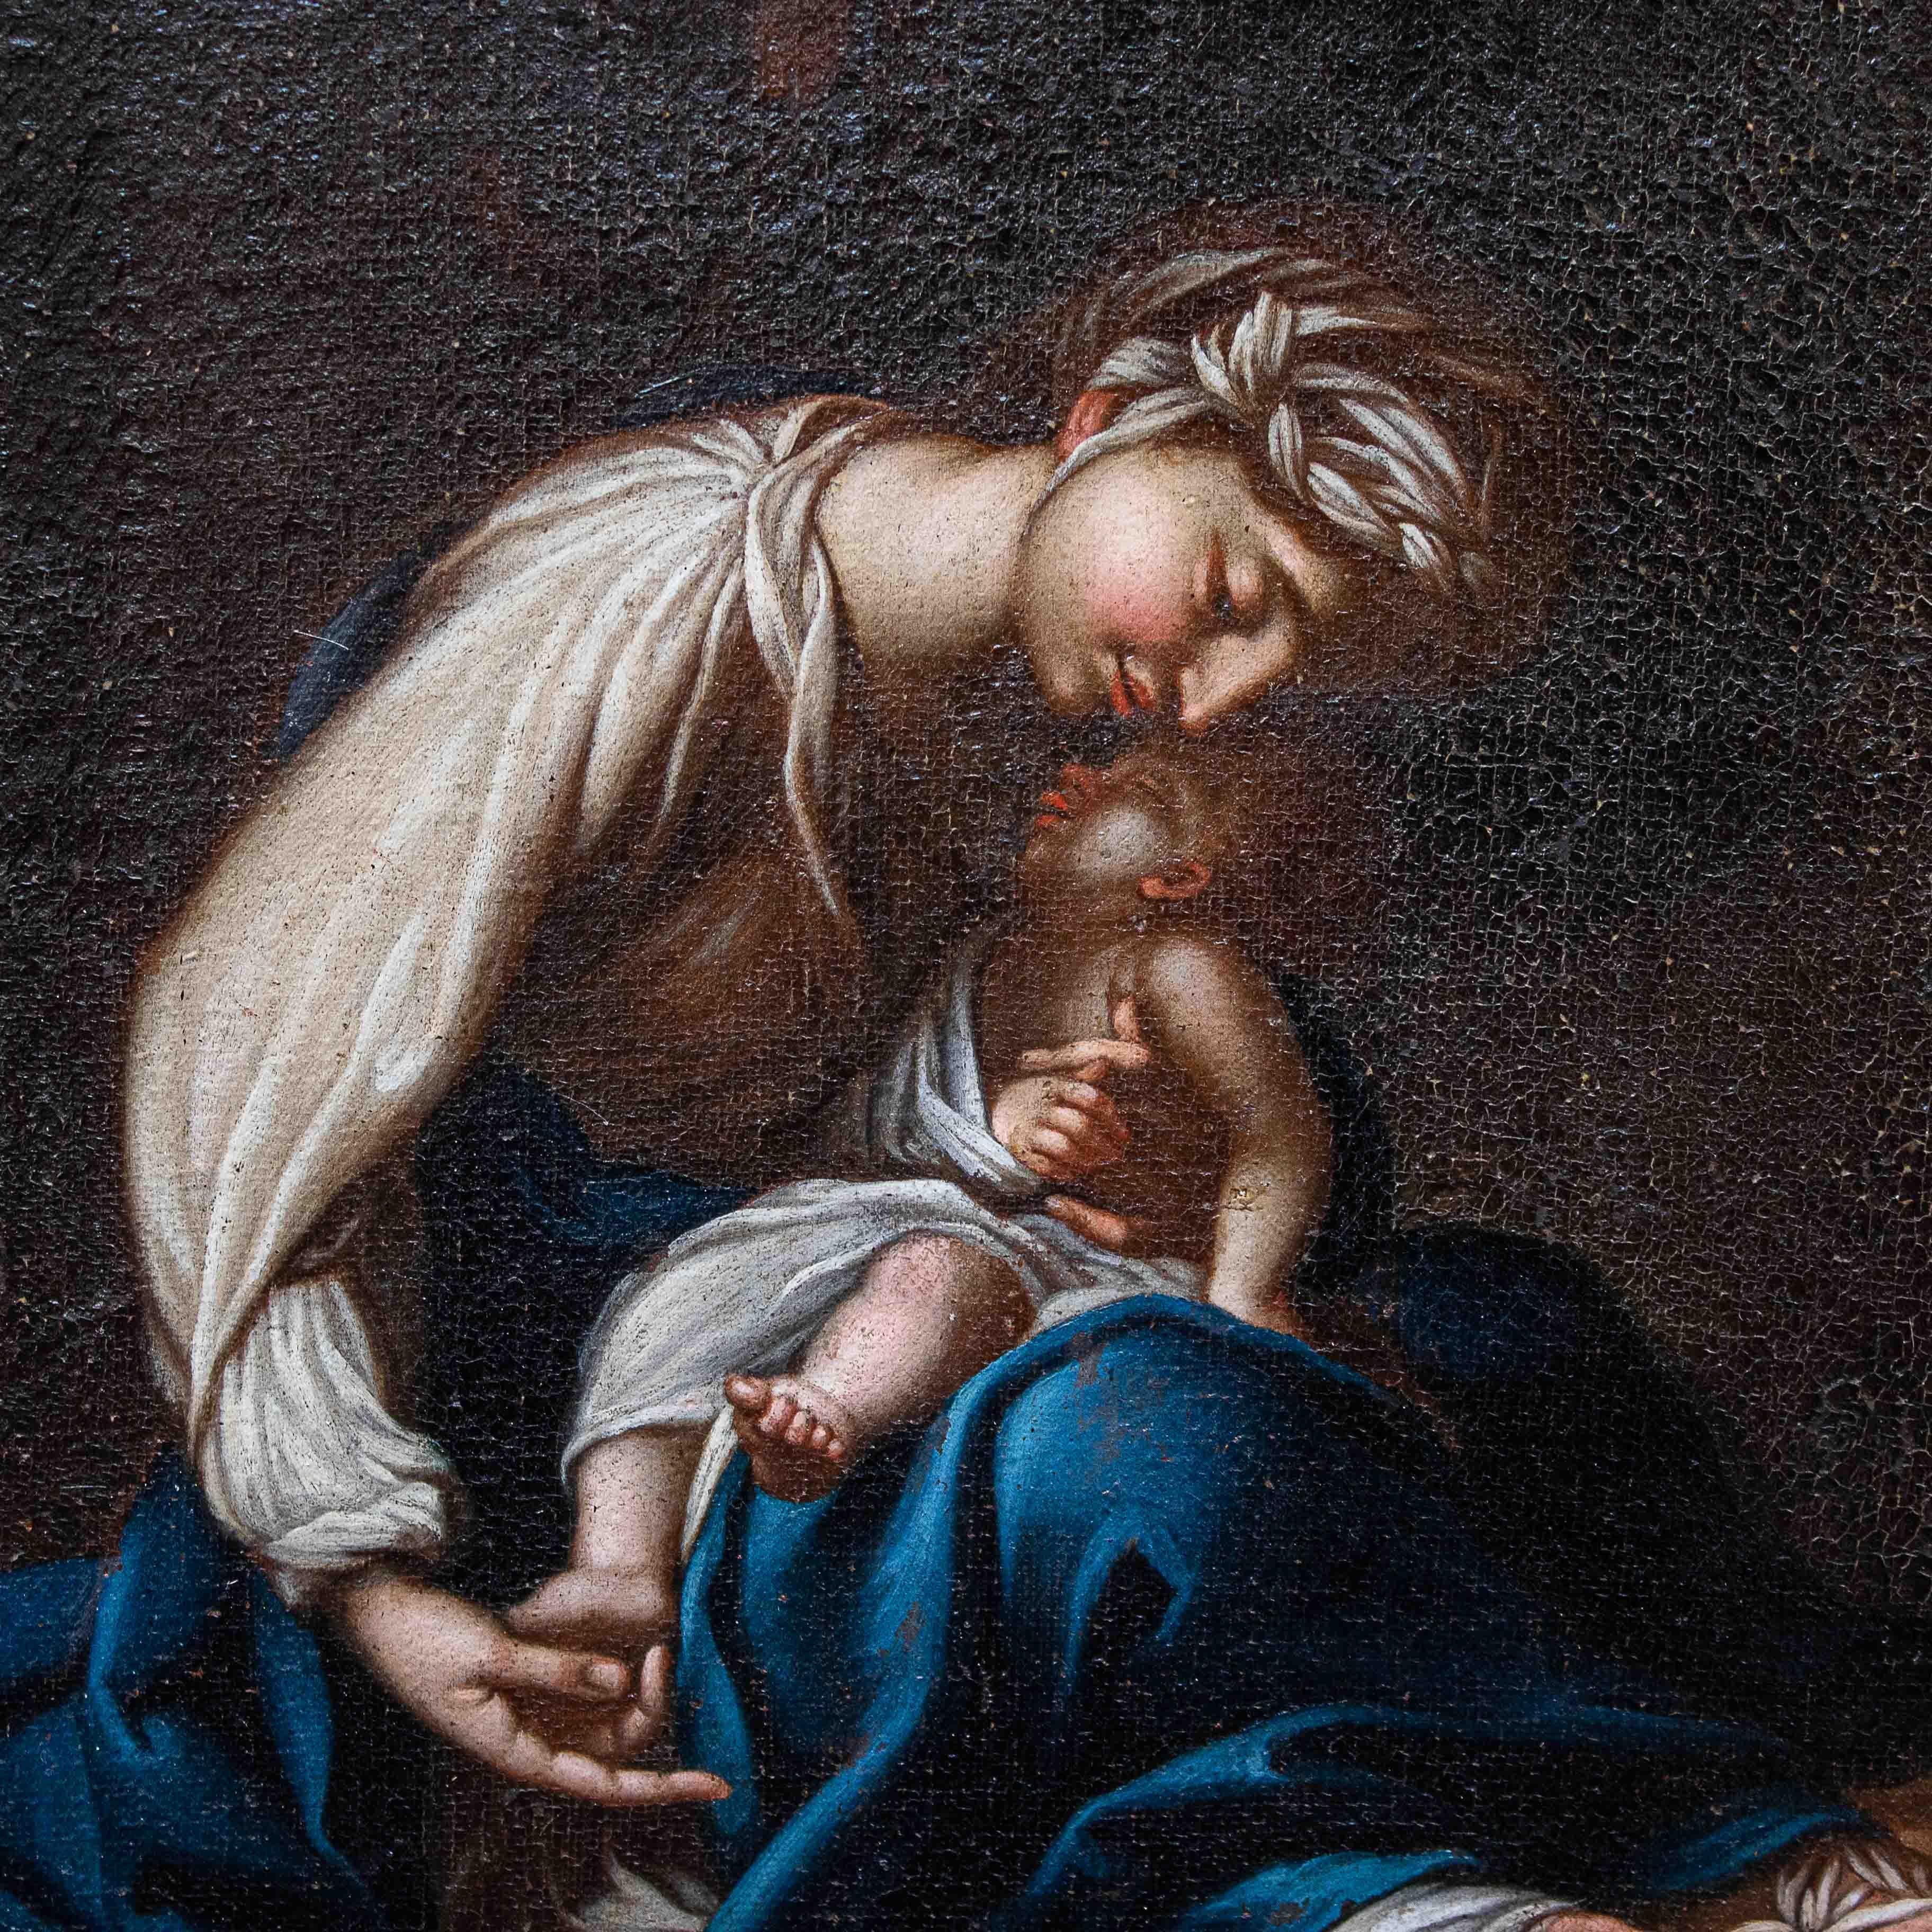 Italian 16th Century Madonna with Child Painting Oil on Canvas by Follower of Correggio